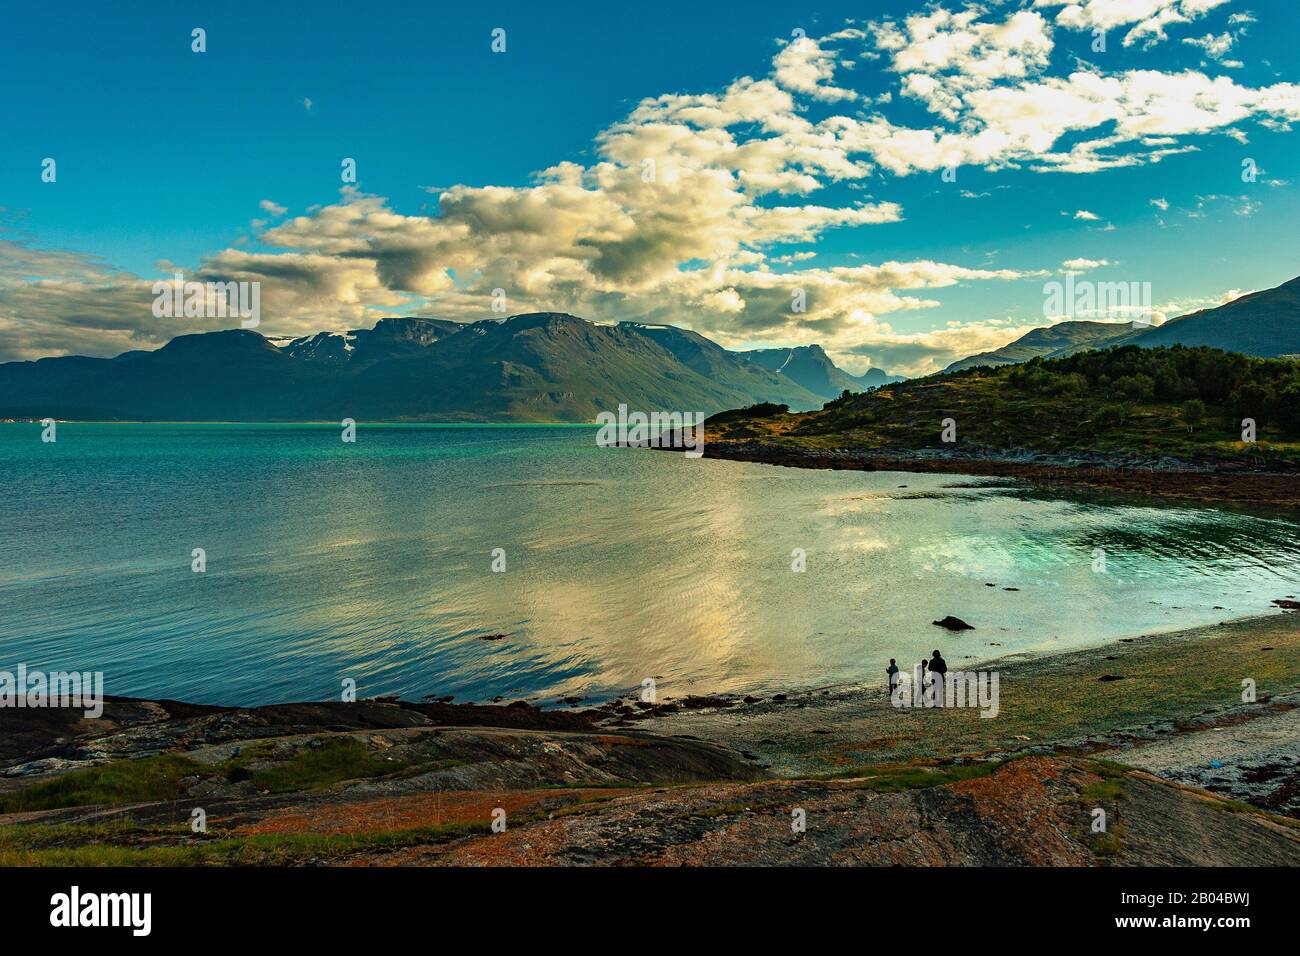 Tourists on the shore of Lyngenfjord, Norway Stock Photo